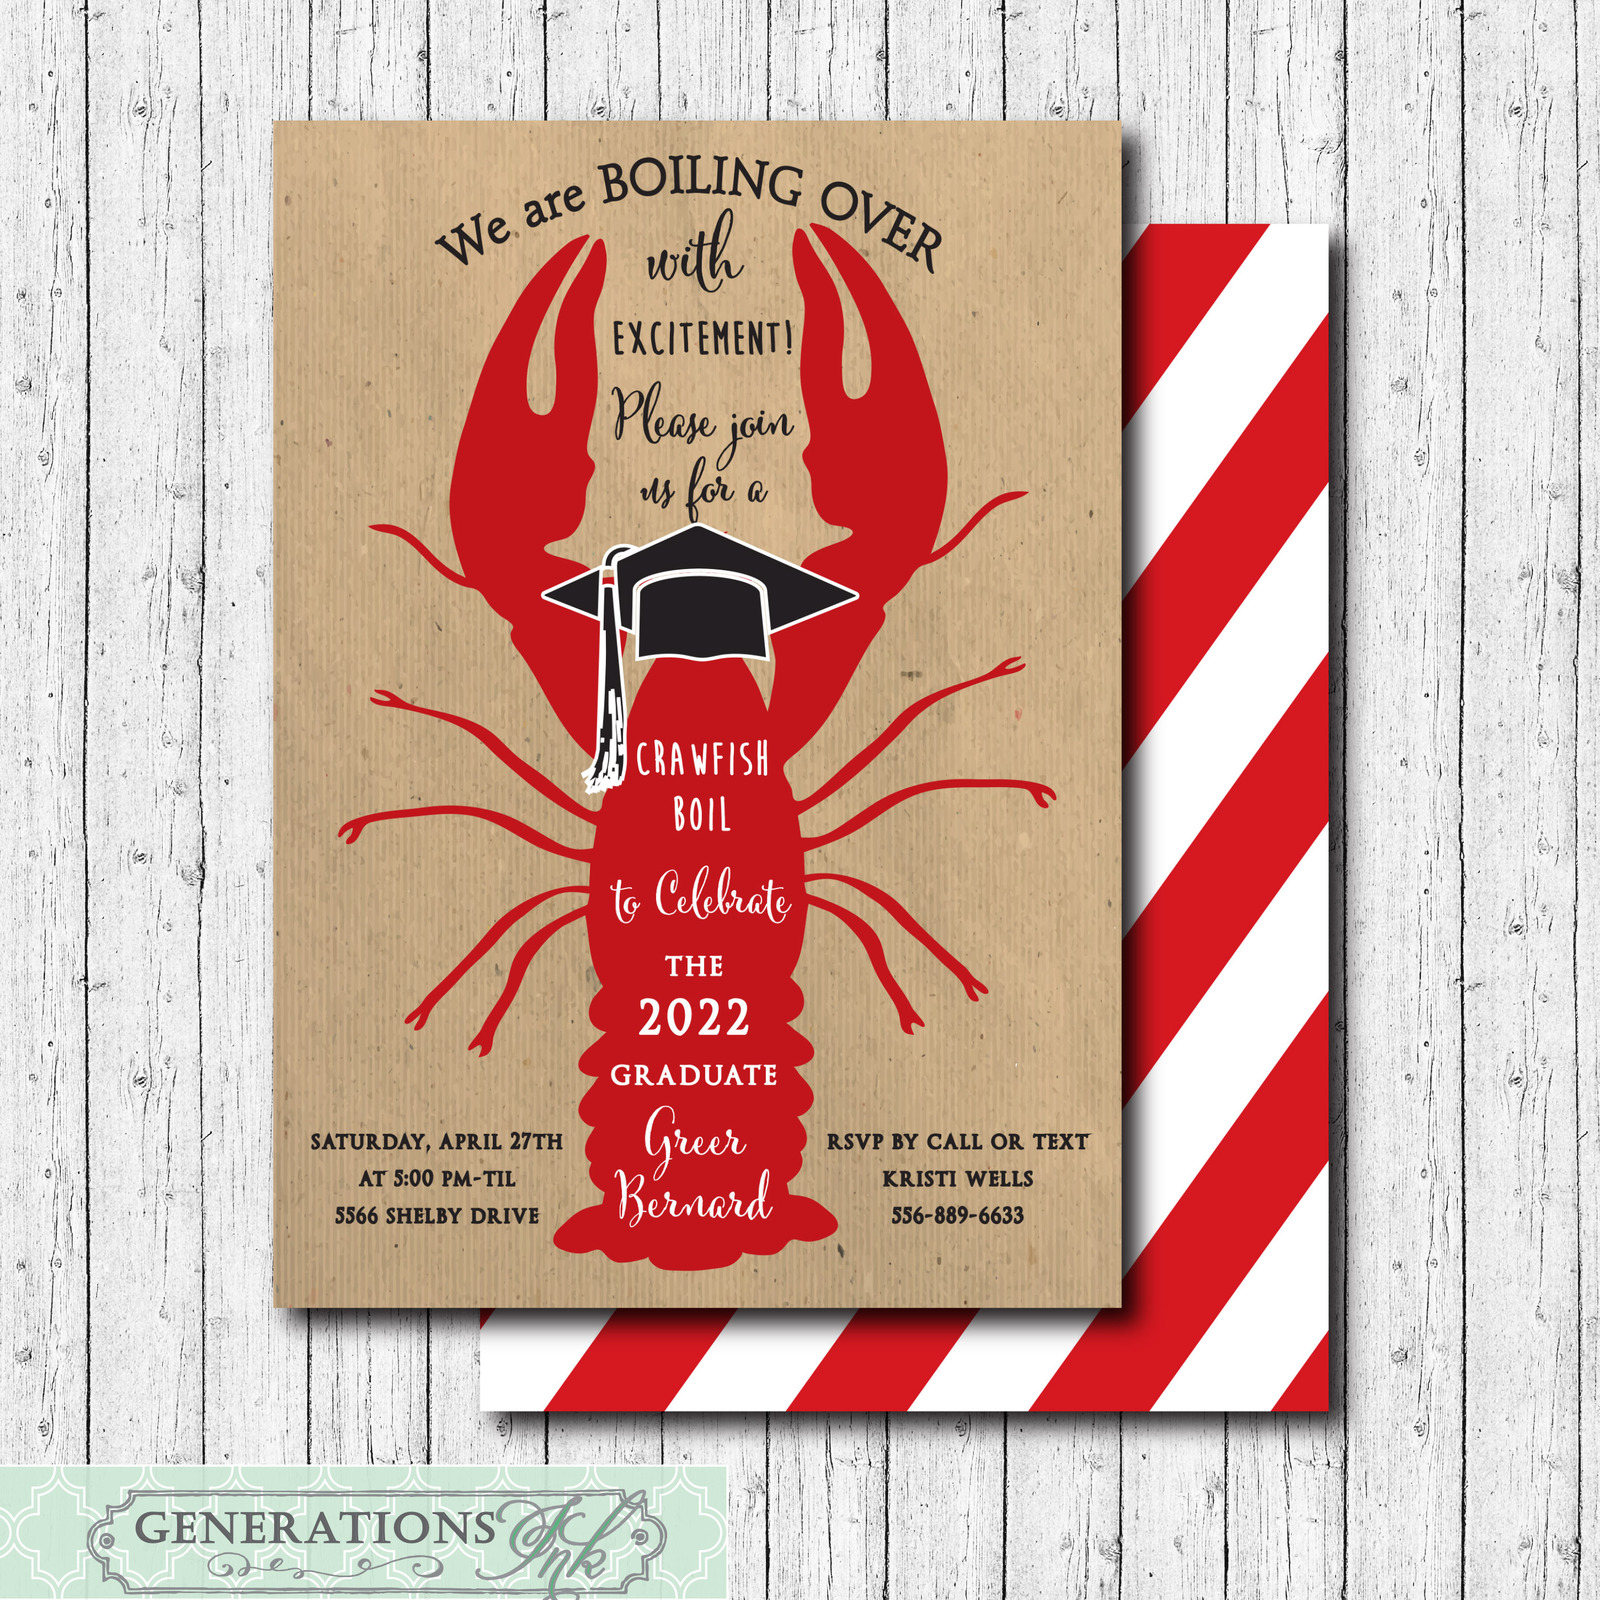 Primary image for Graduation Party and Crawfish Boil Invitation/Printable/Digital/DIY/Senior Party